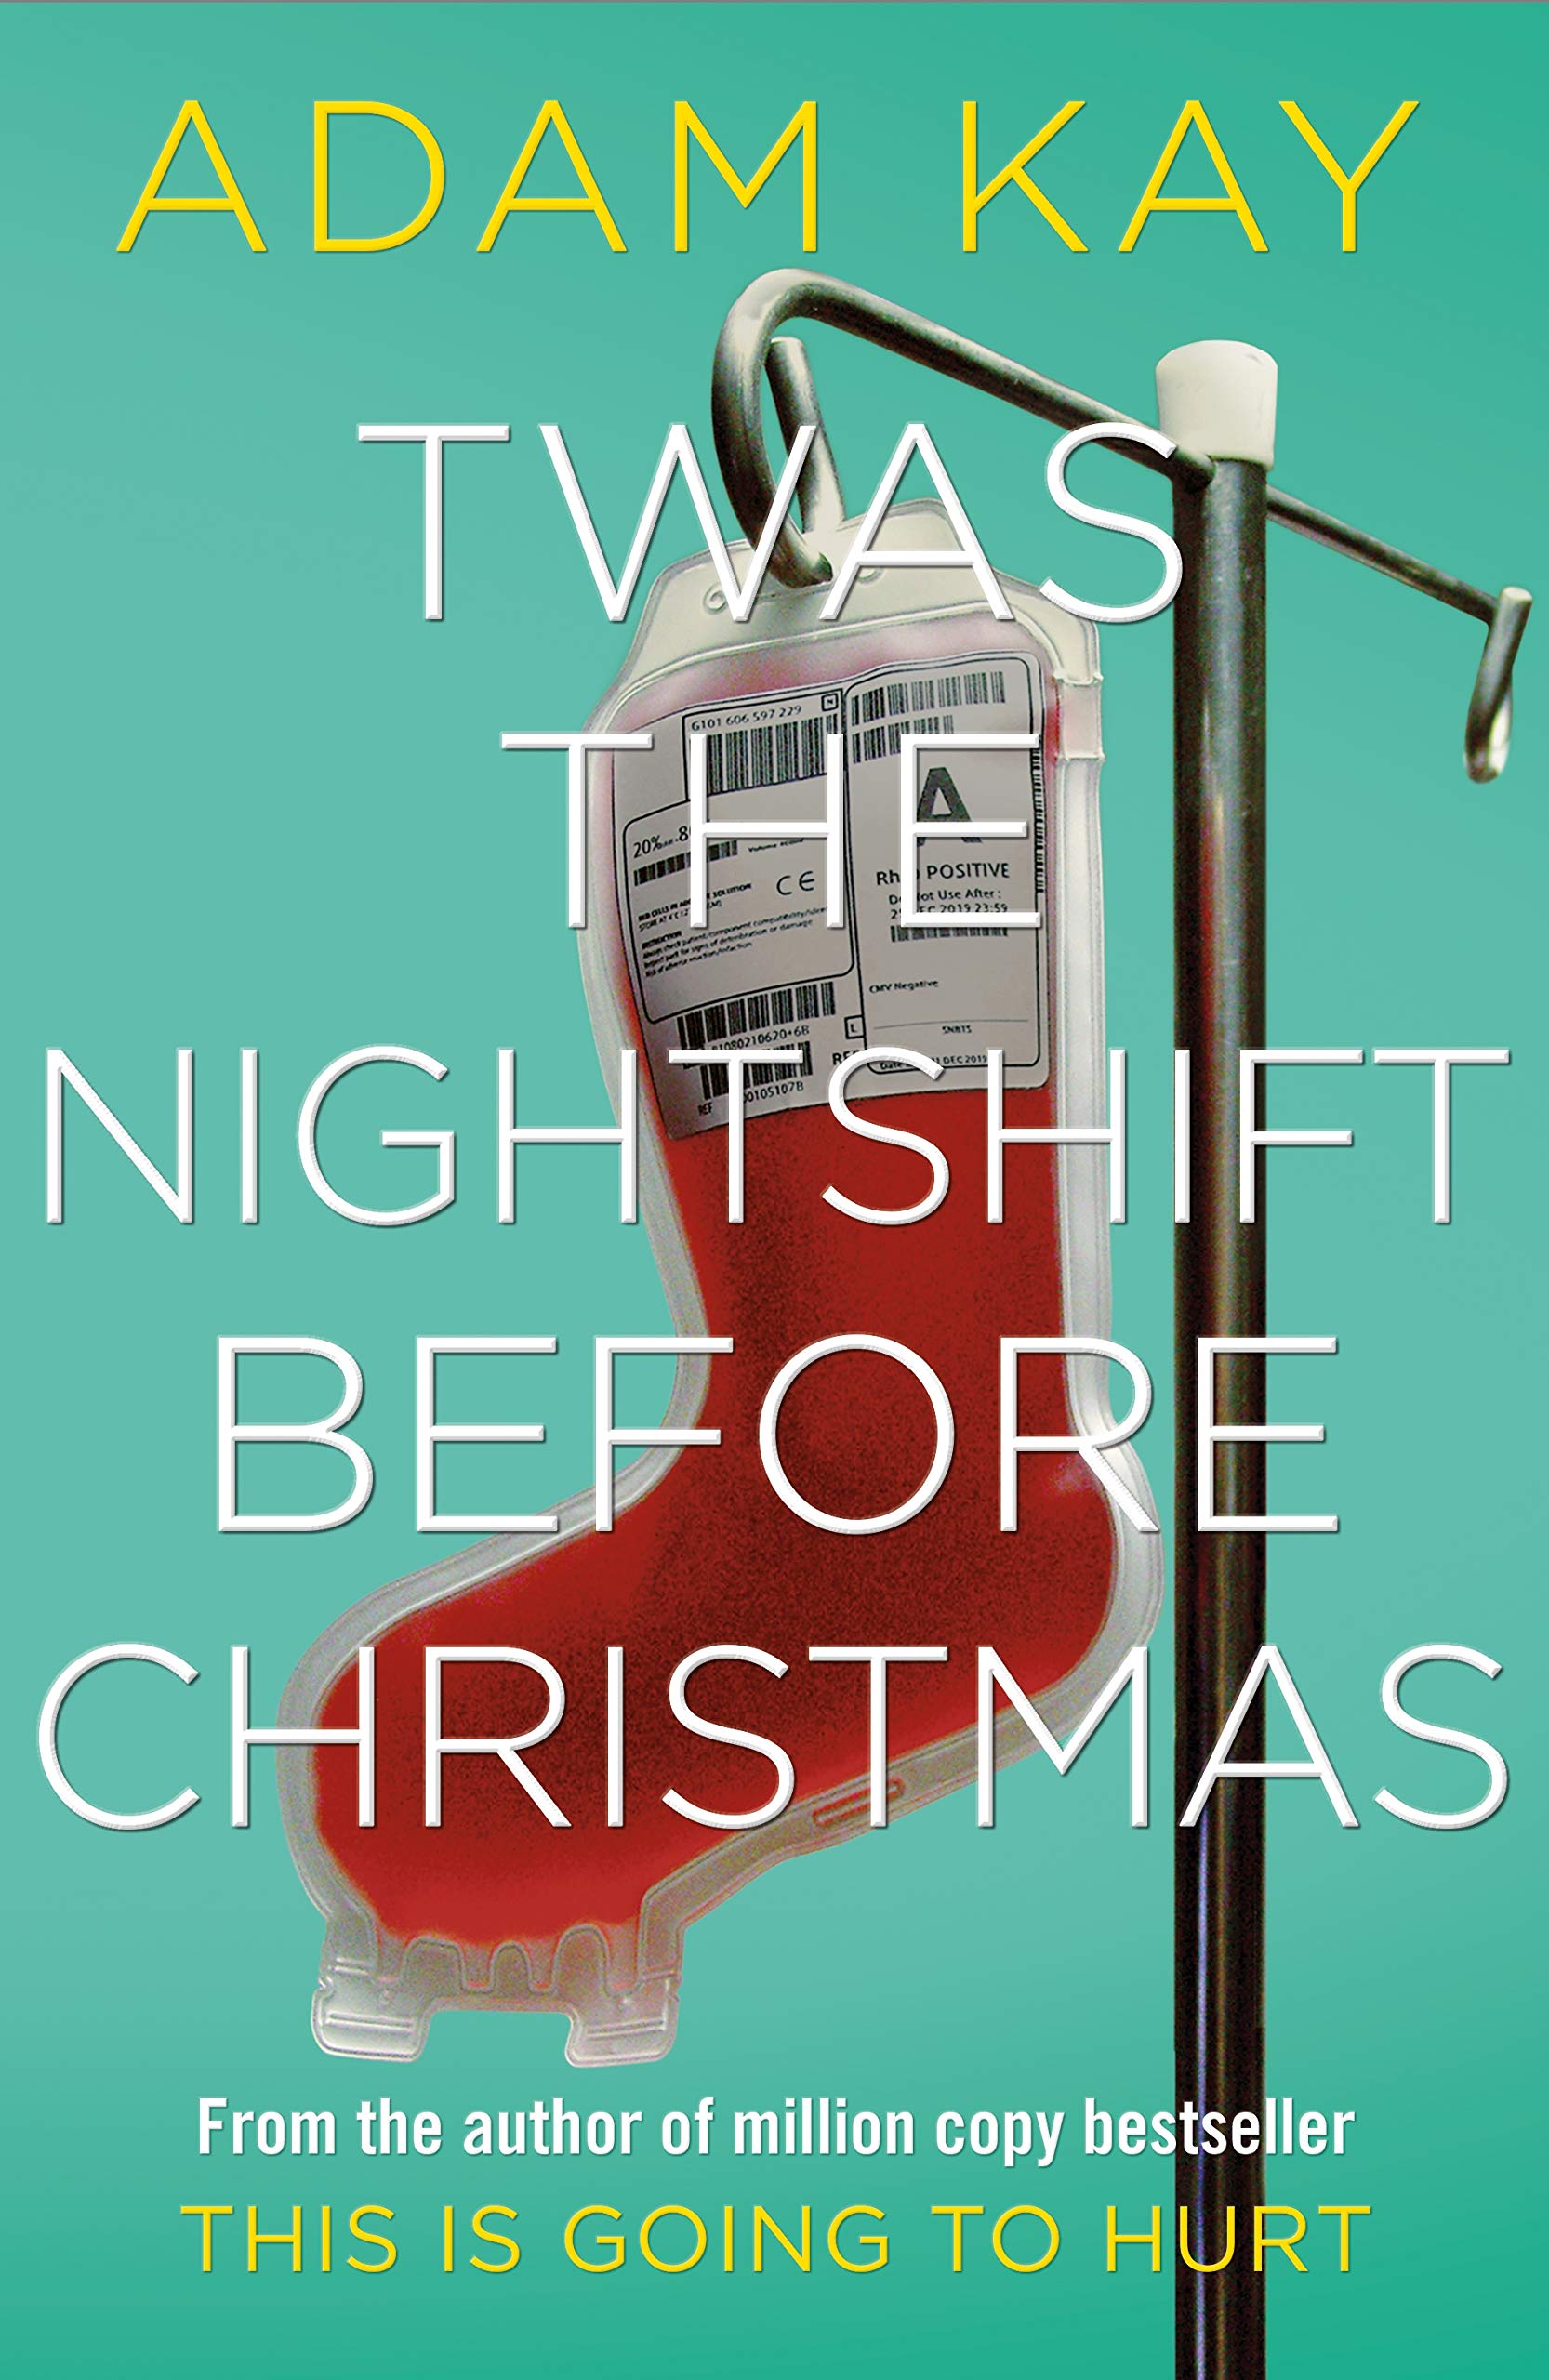 Twas The Nightshift Before Christmas Book Release Date?